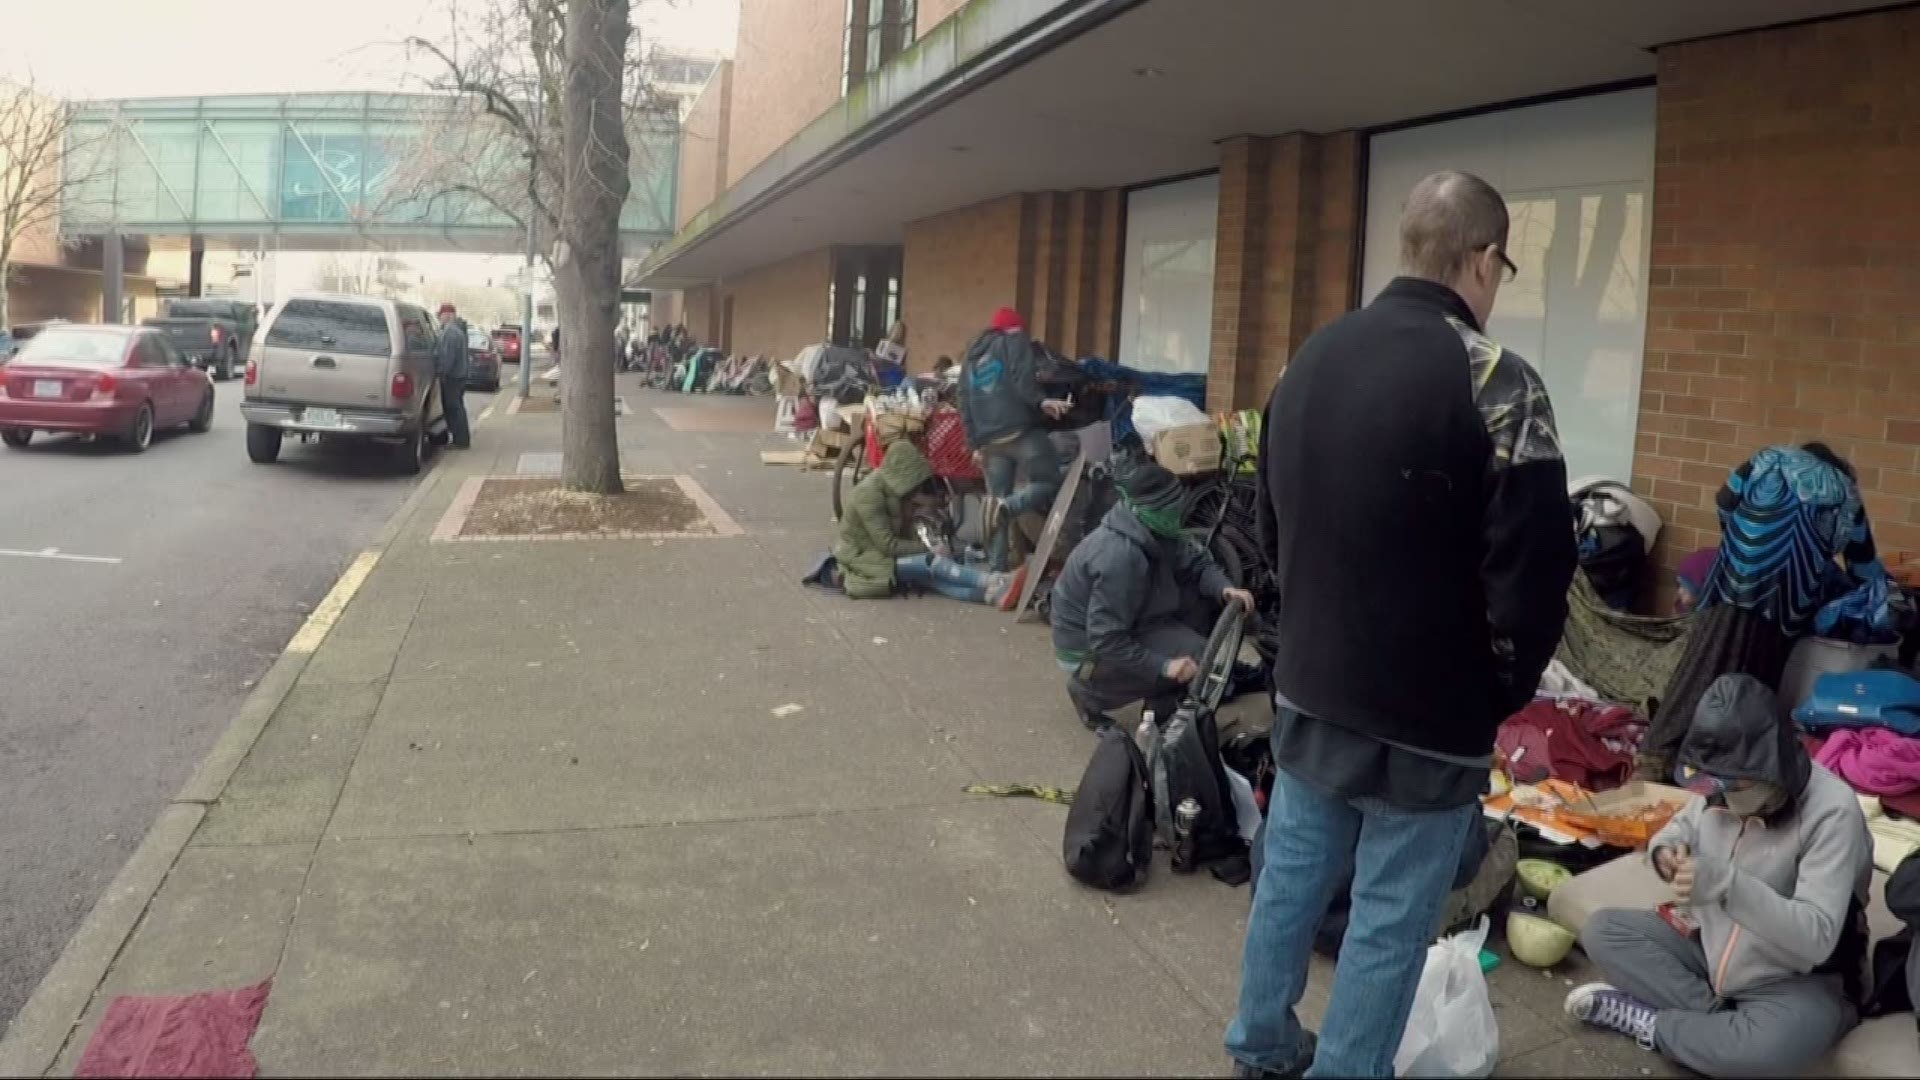 The city promised to open more than 100 shelter beds before the New Year. Those are no where to be found.